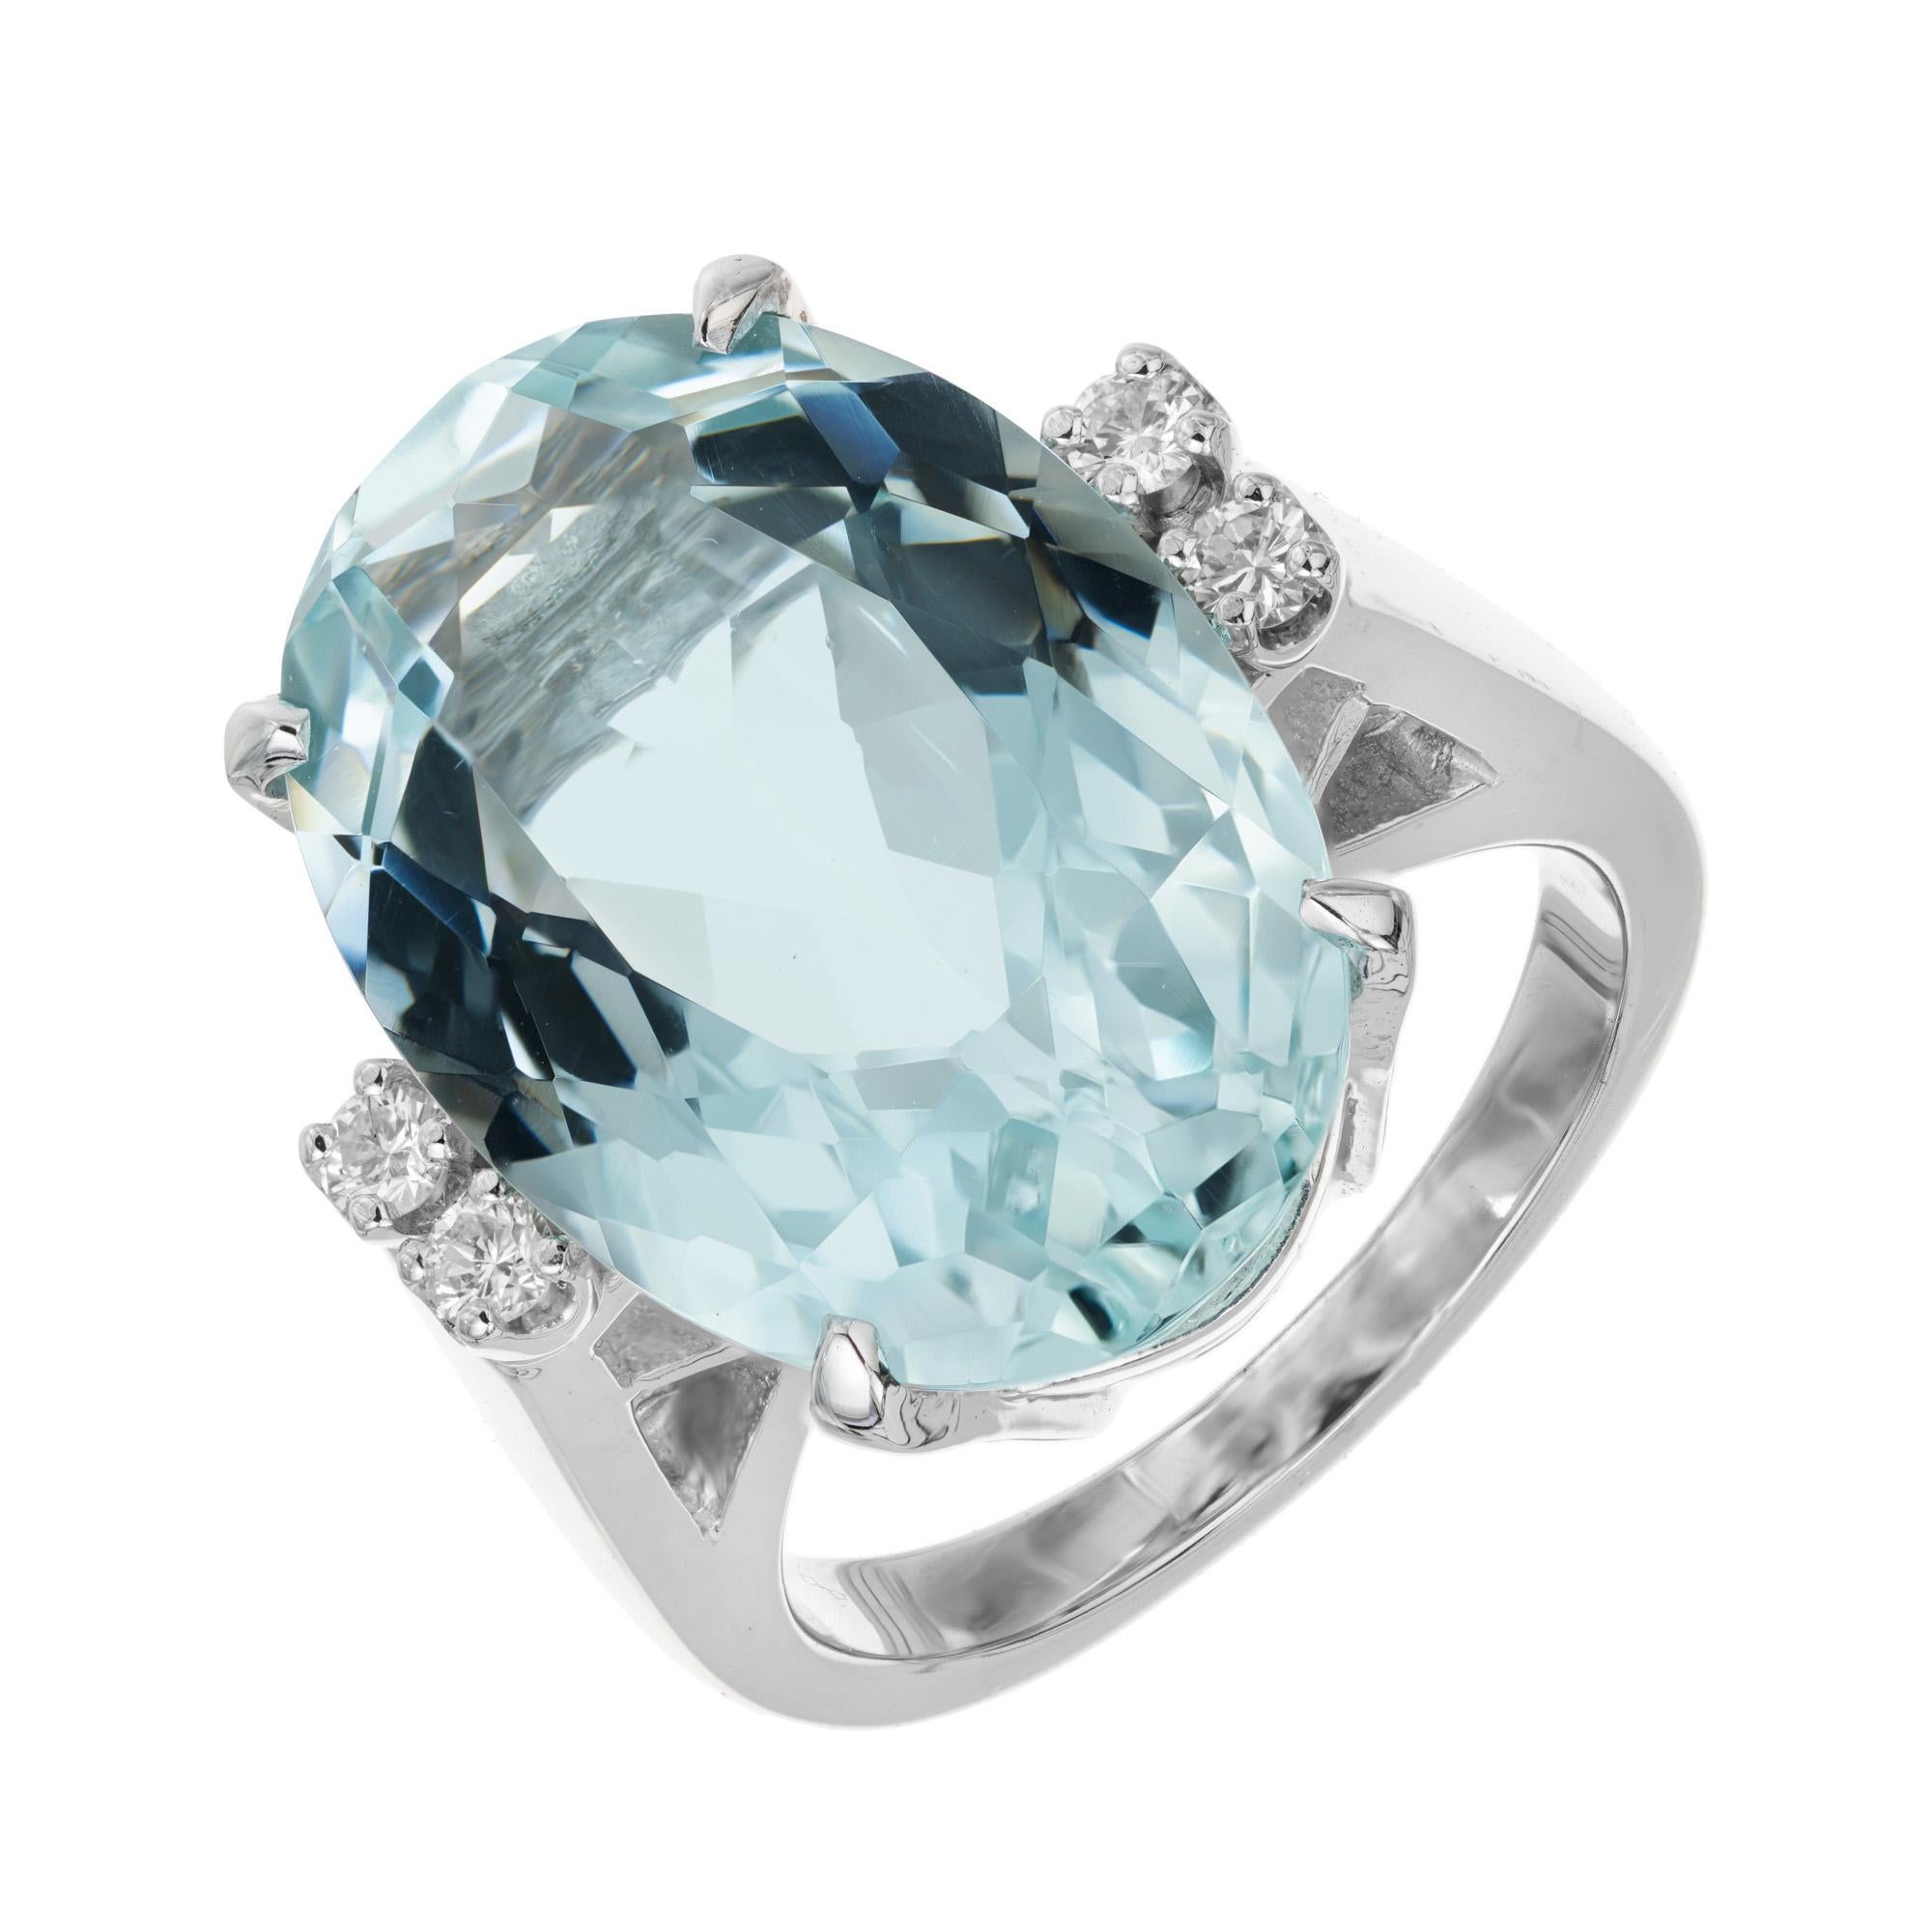 This stunning 1950's oval aquamarine has a total carat weight of 12.27cts. Perfectly mounted in a 14k white gold cocktail setting. On each side of the aqua are 2 round brilliant cut accent diamonds. The mid-century design of this cocktail ring makes